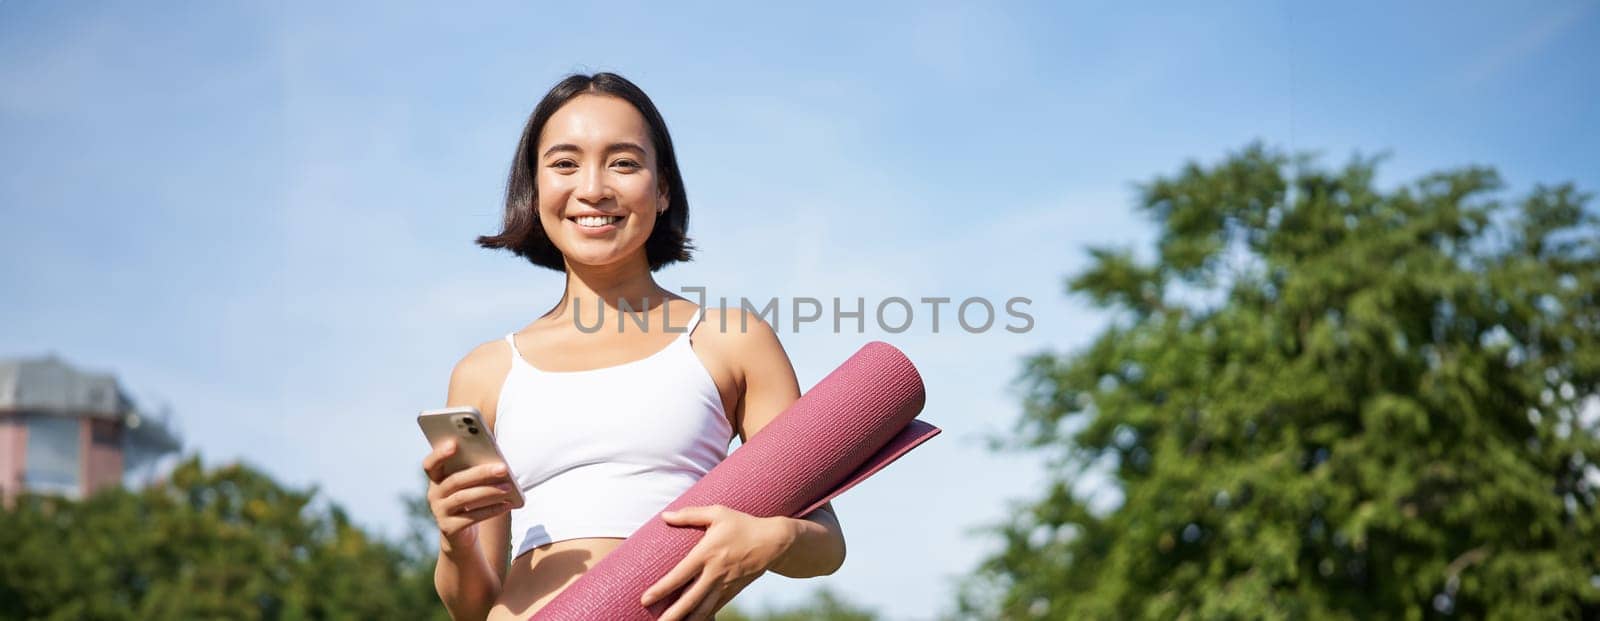 Portrait of young asian woman checking her phone during workout, walking in park with rubber mat, going to the gym, holding smartphone.